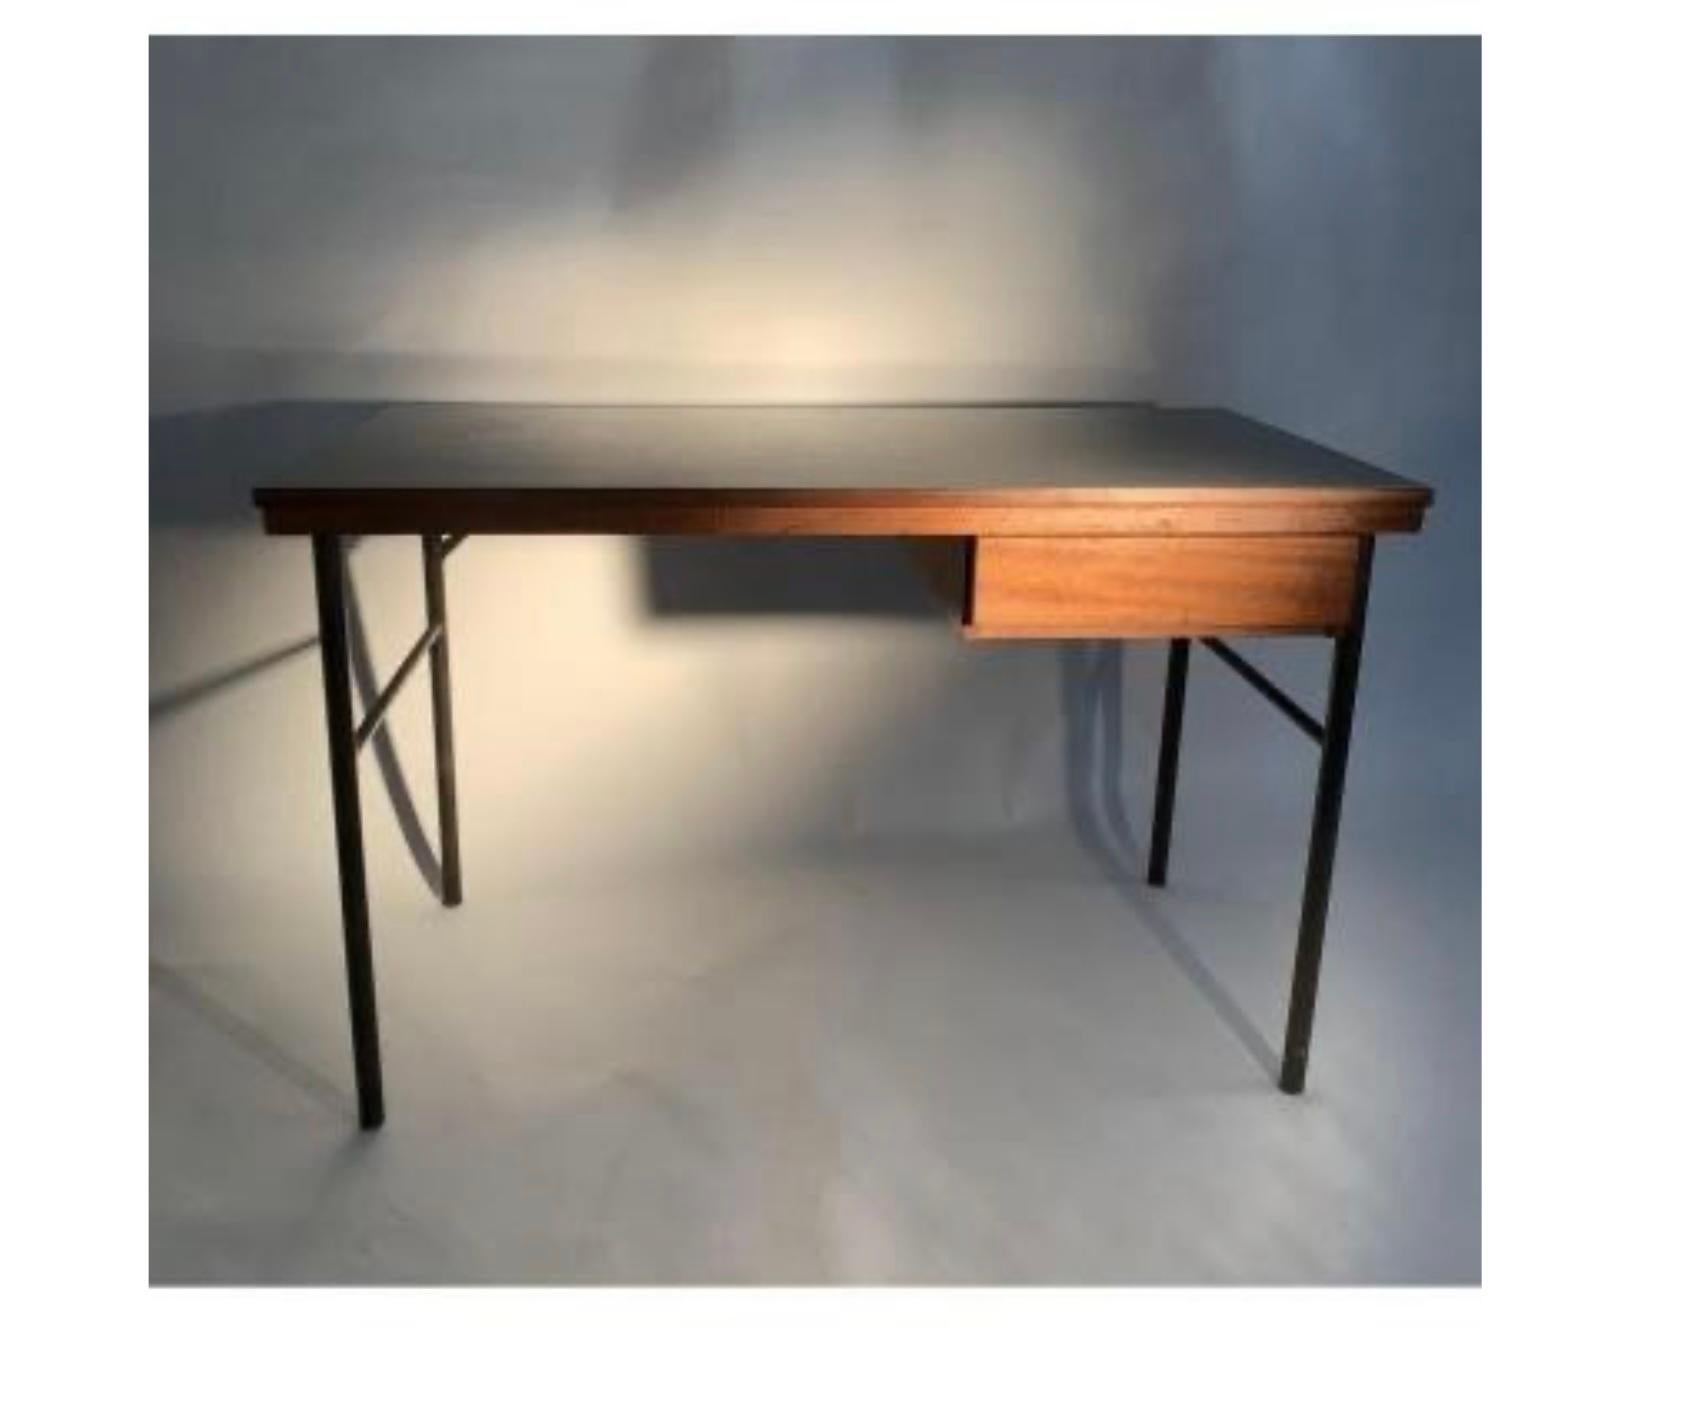 1950s desk from 